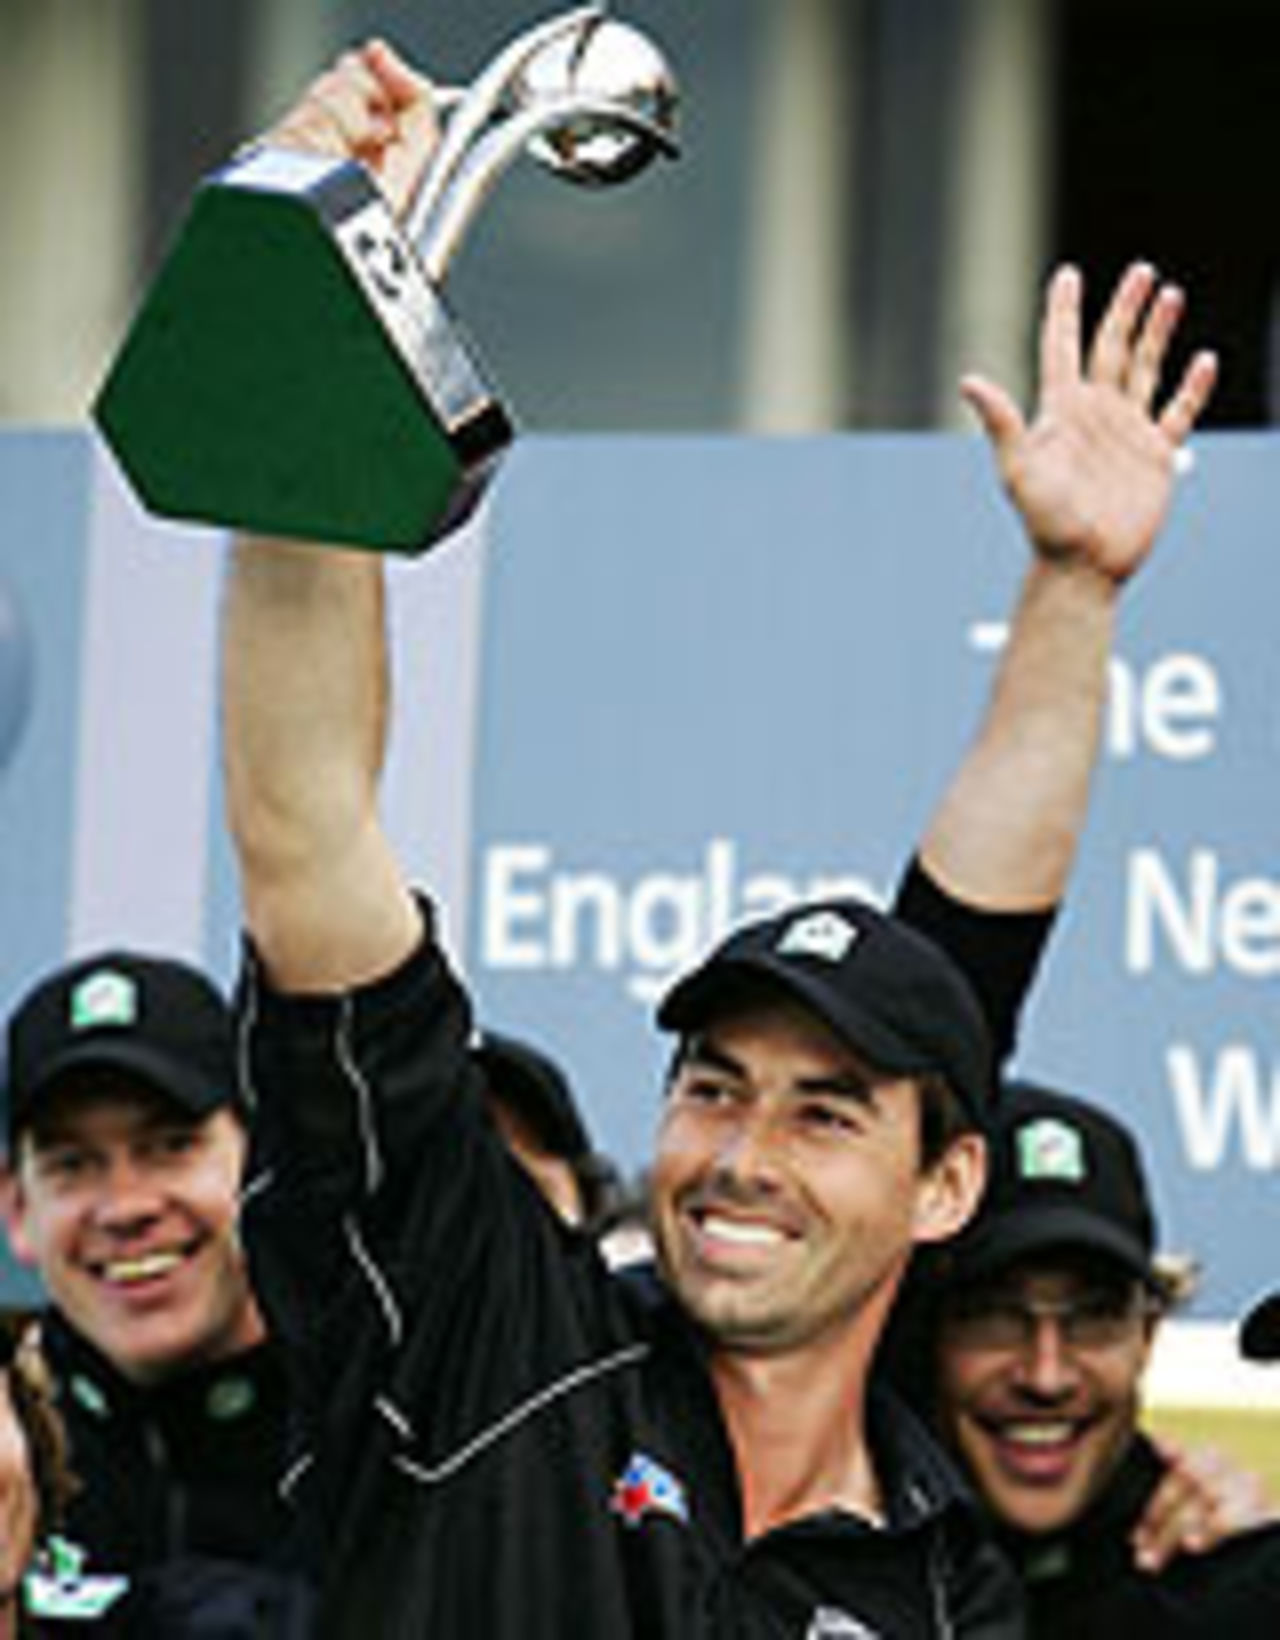 Stephen Fleming with the NatWest Series trophy, New Zealand v West Indies, Lord's, July 10, 2004